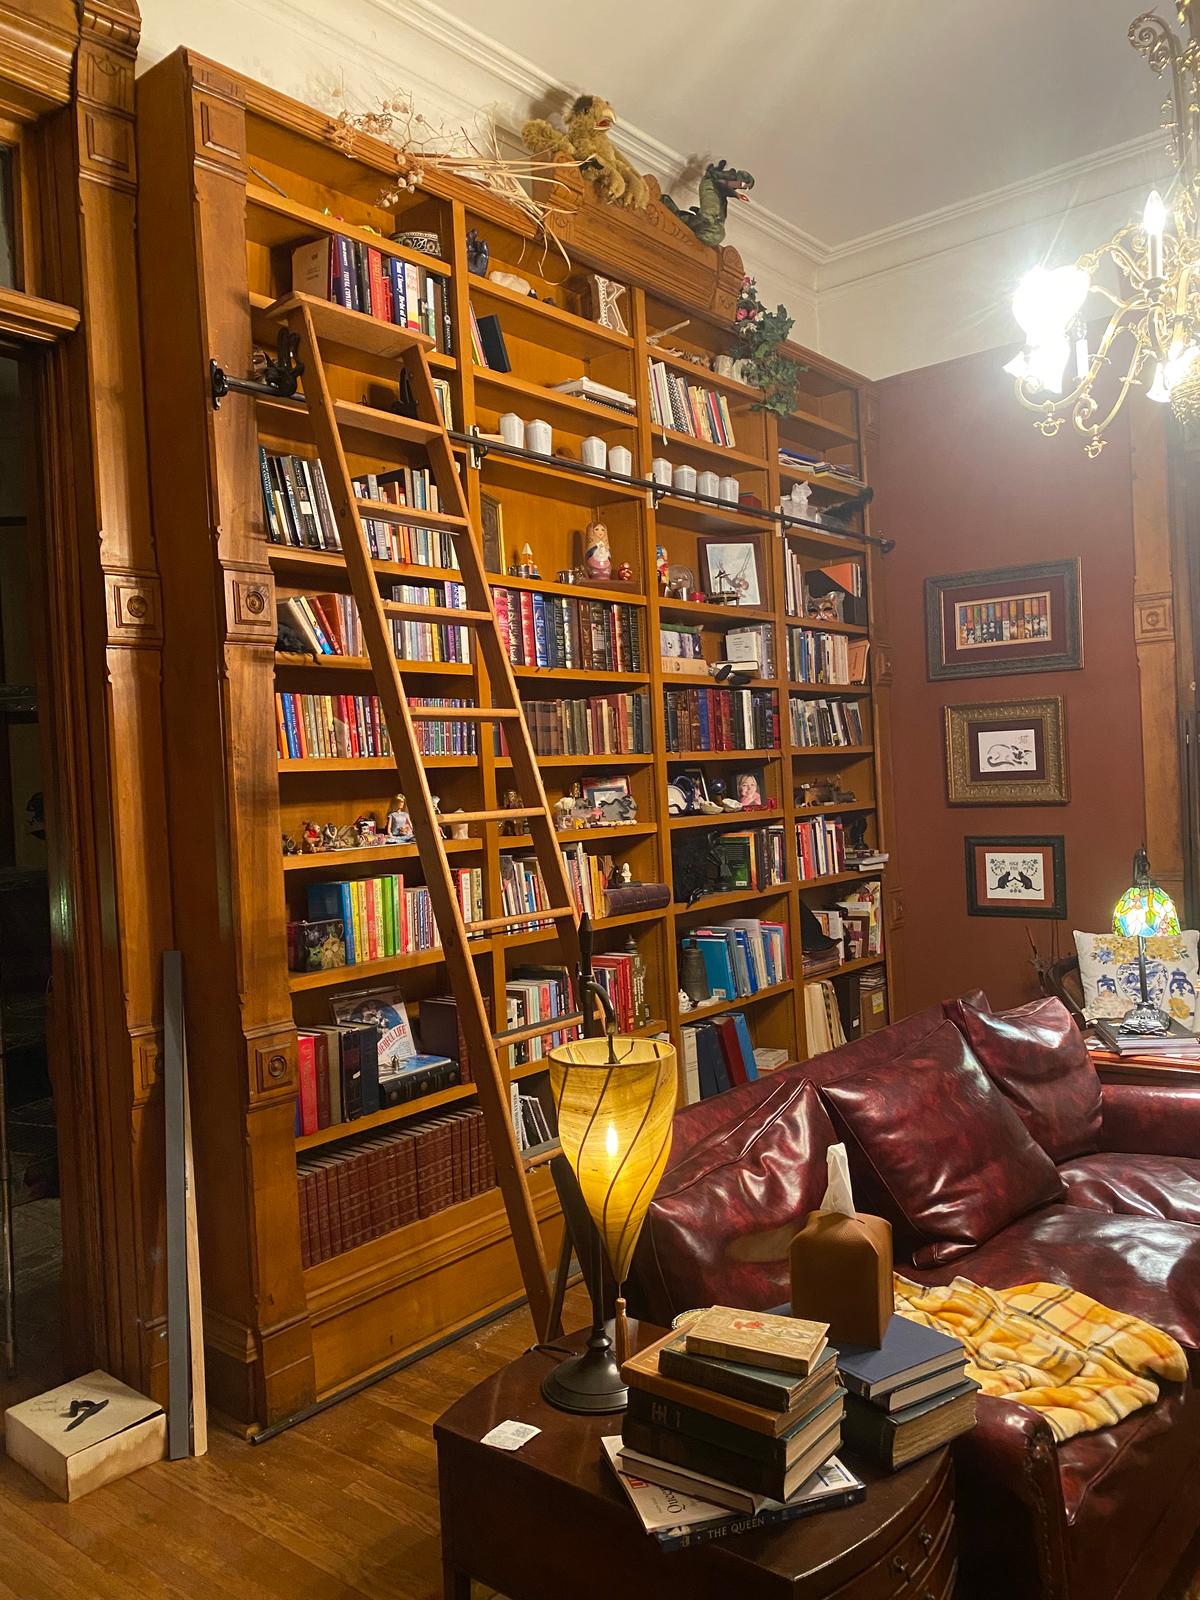 The library in the mansion. (Courtesy of <a href="https://www.facebook.com/profile.php?id=100076974185503">Krasnesky Manor for Wayward Cats</a>)